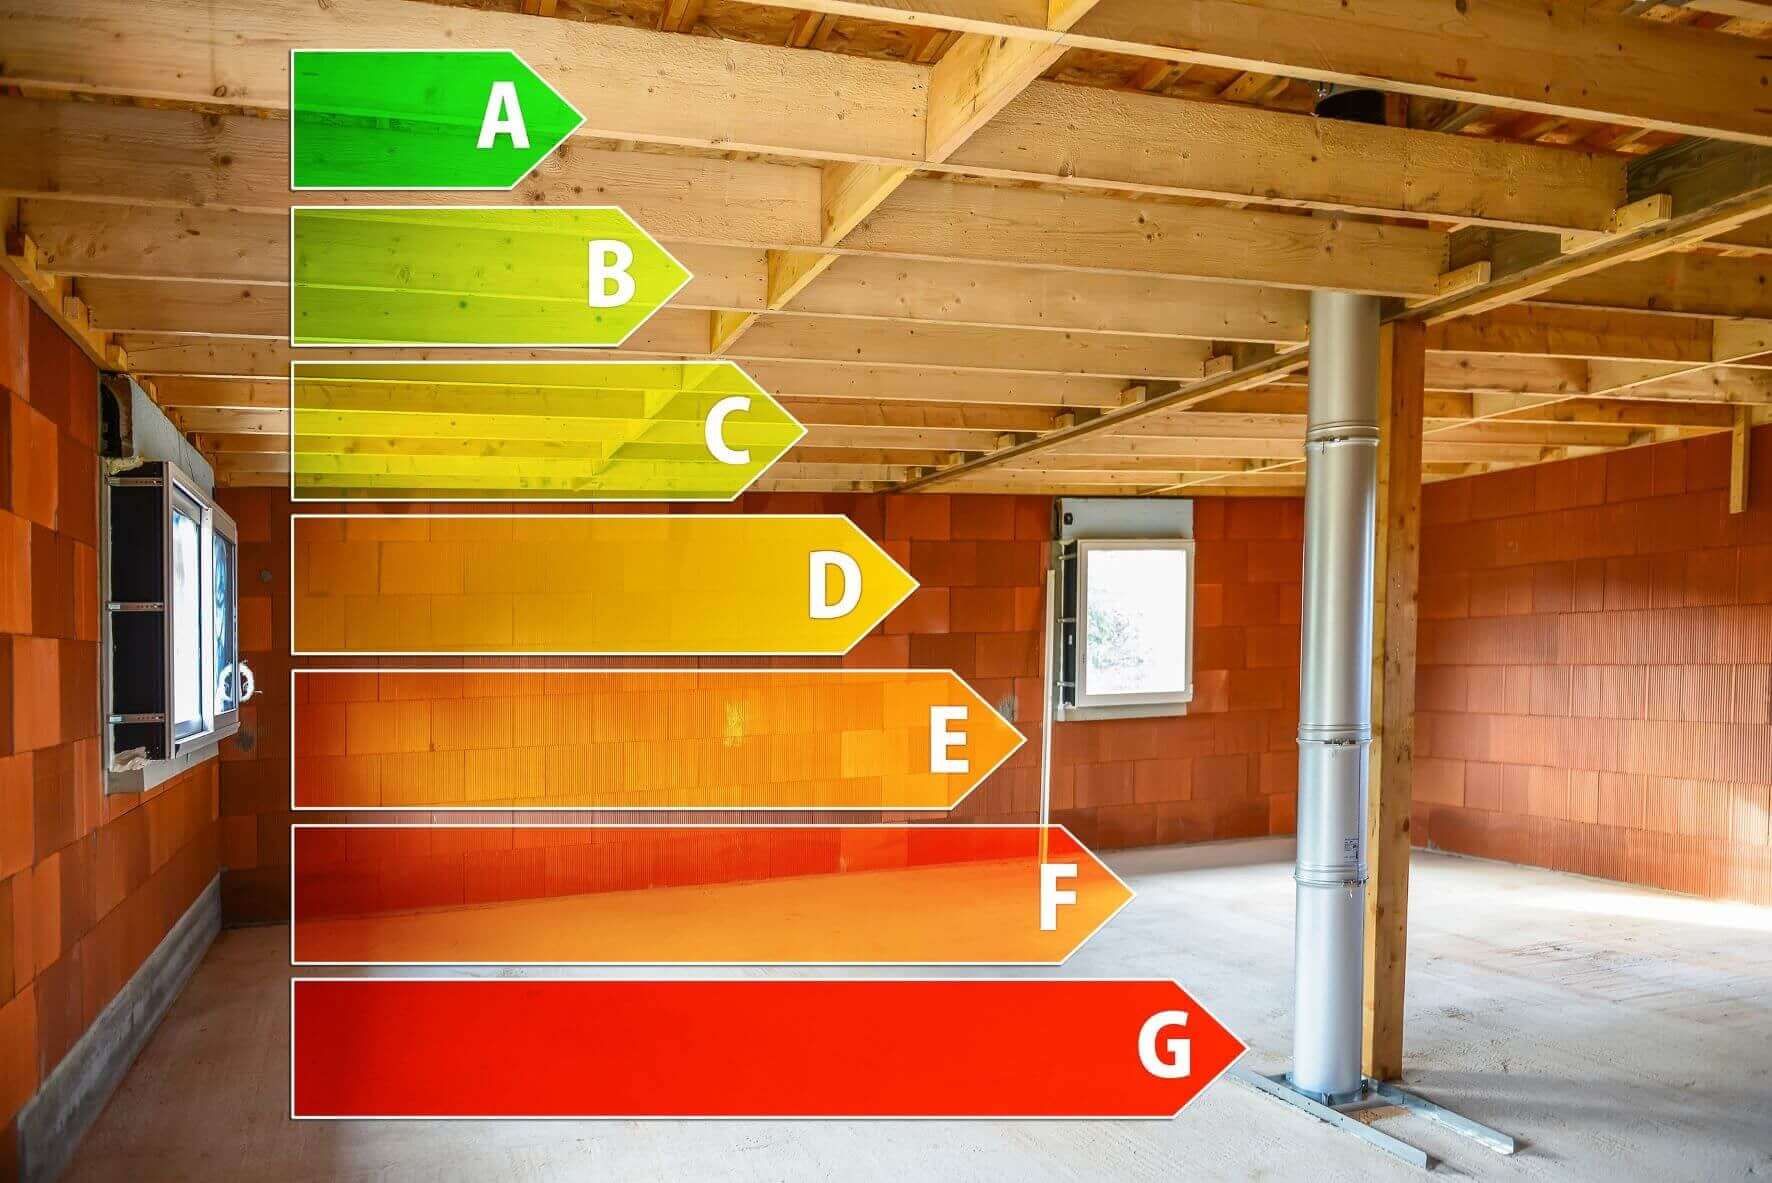 WADE BUILDING SUPPLIES | ENERGY PERFORMANCE CERTIFICATE COLOR CODED ILLUSTRATION FROM A - G WITH ECO HOME IN IMAGE